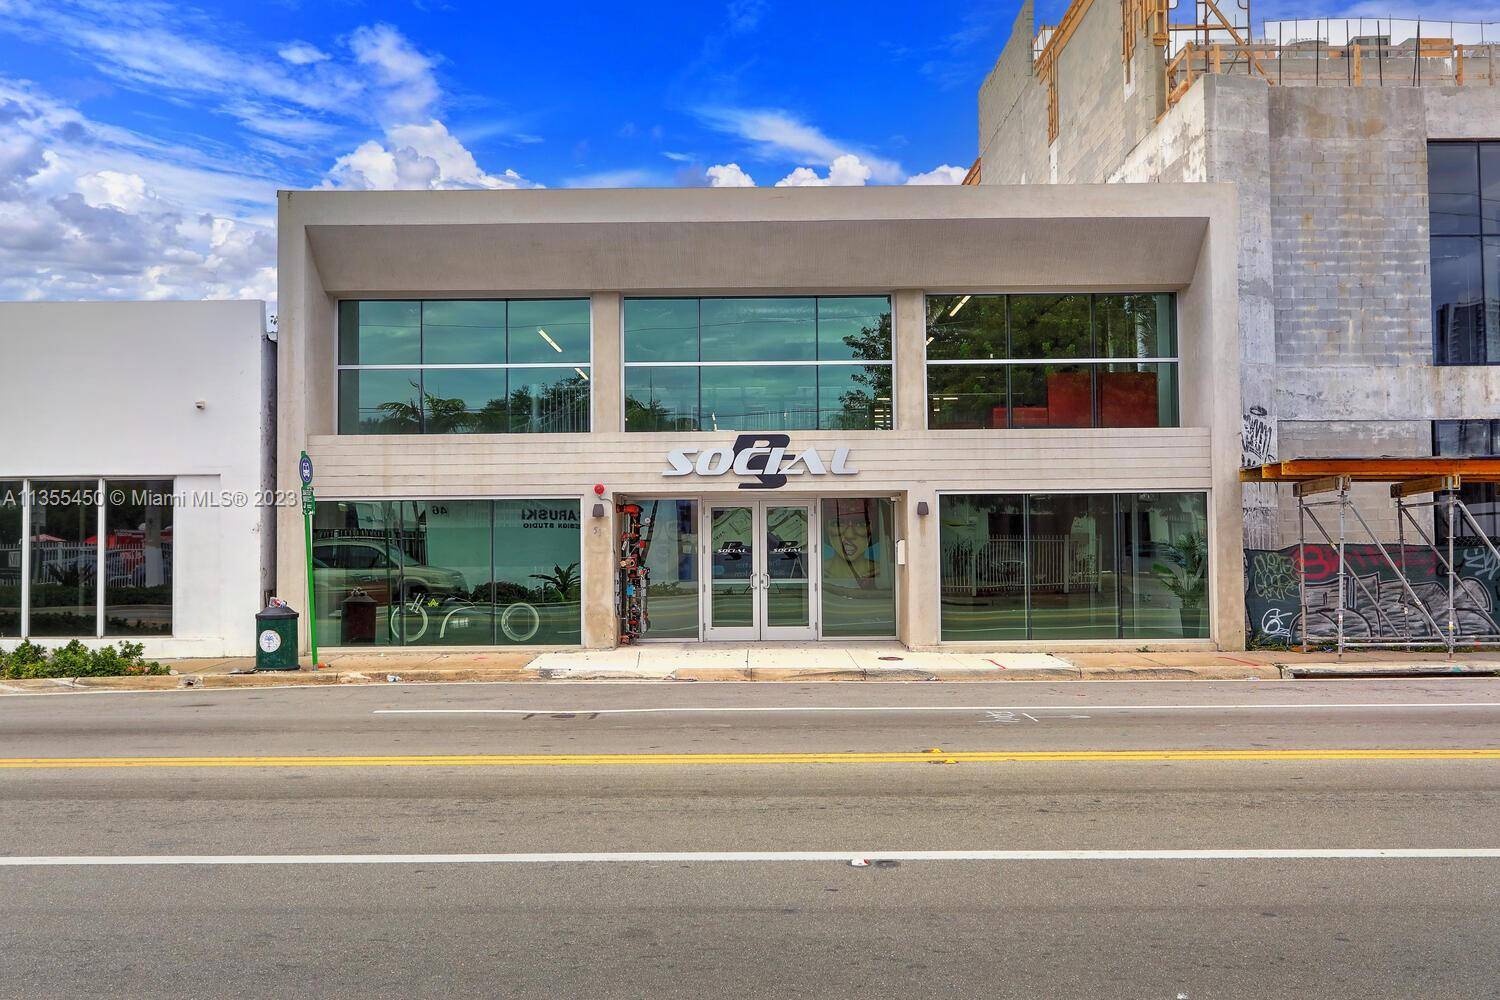 Brand new Building with prime location for retail, showroom space, creative workspace, or art gallery.